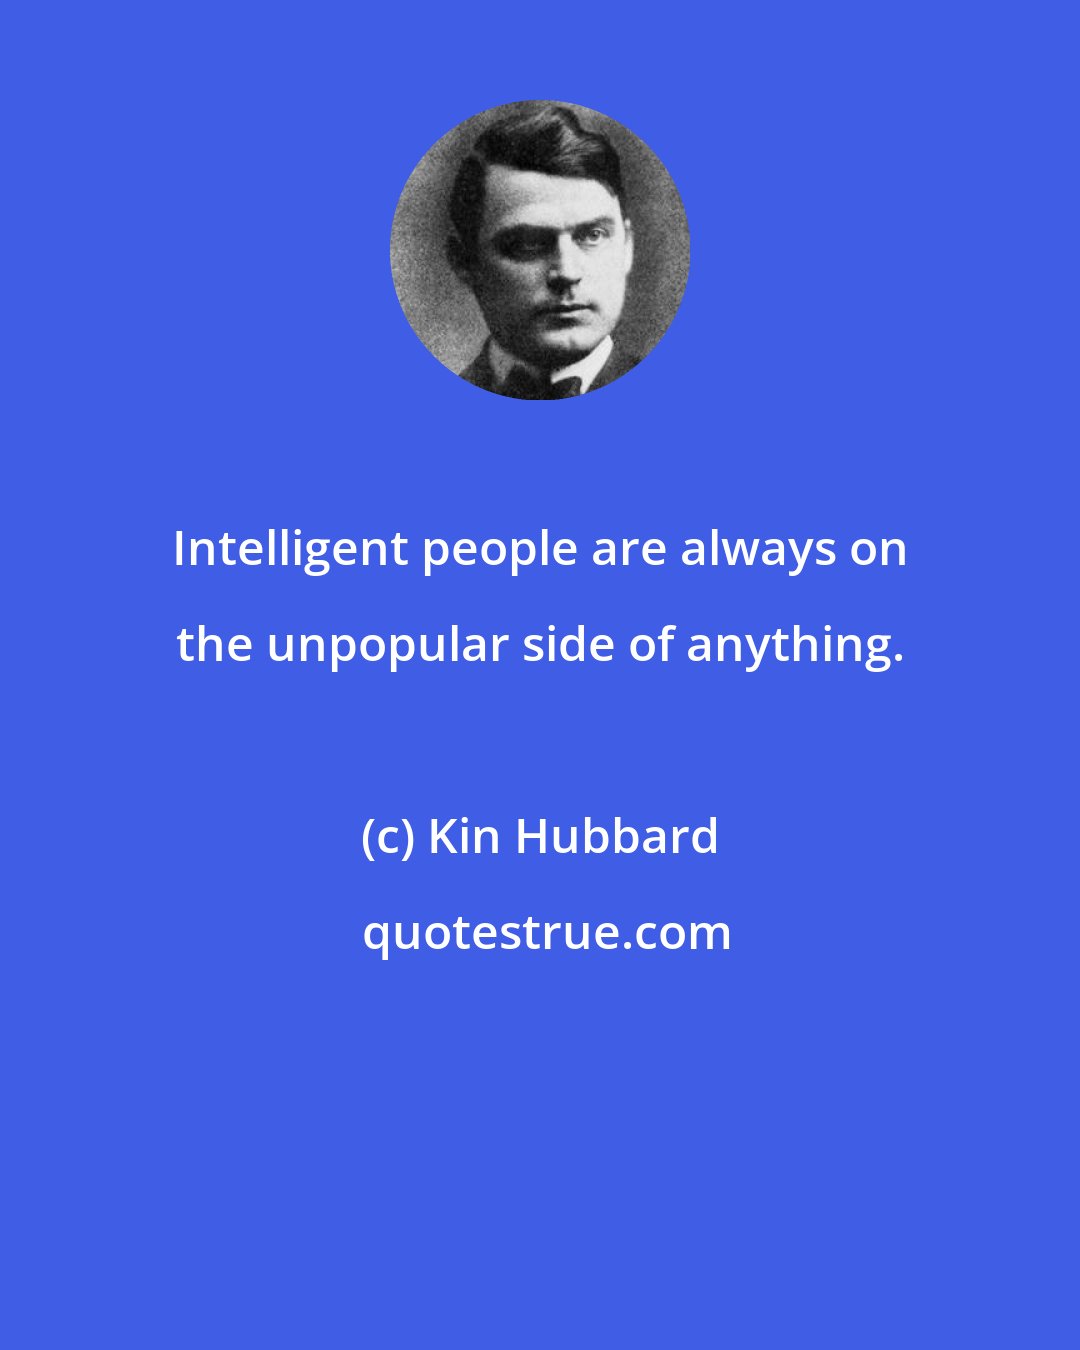 Kin Hubbard: Intelligent people are always on the unpopular side of anything.